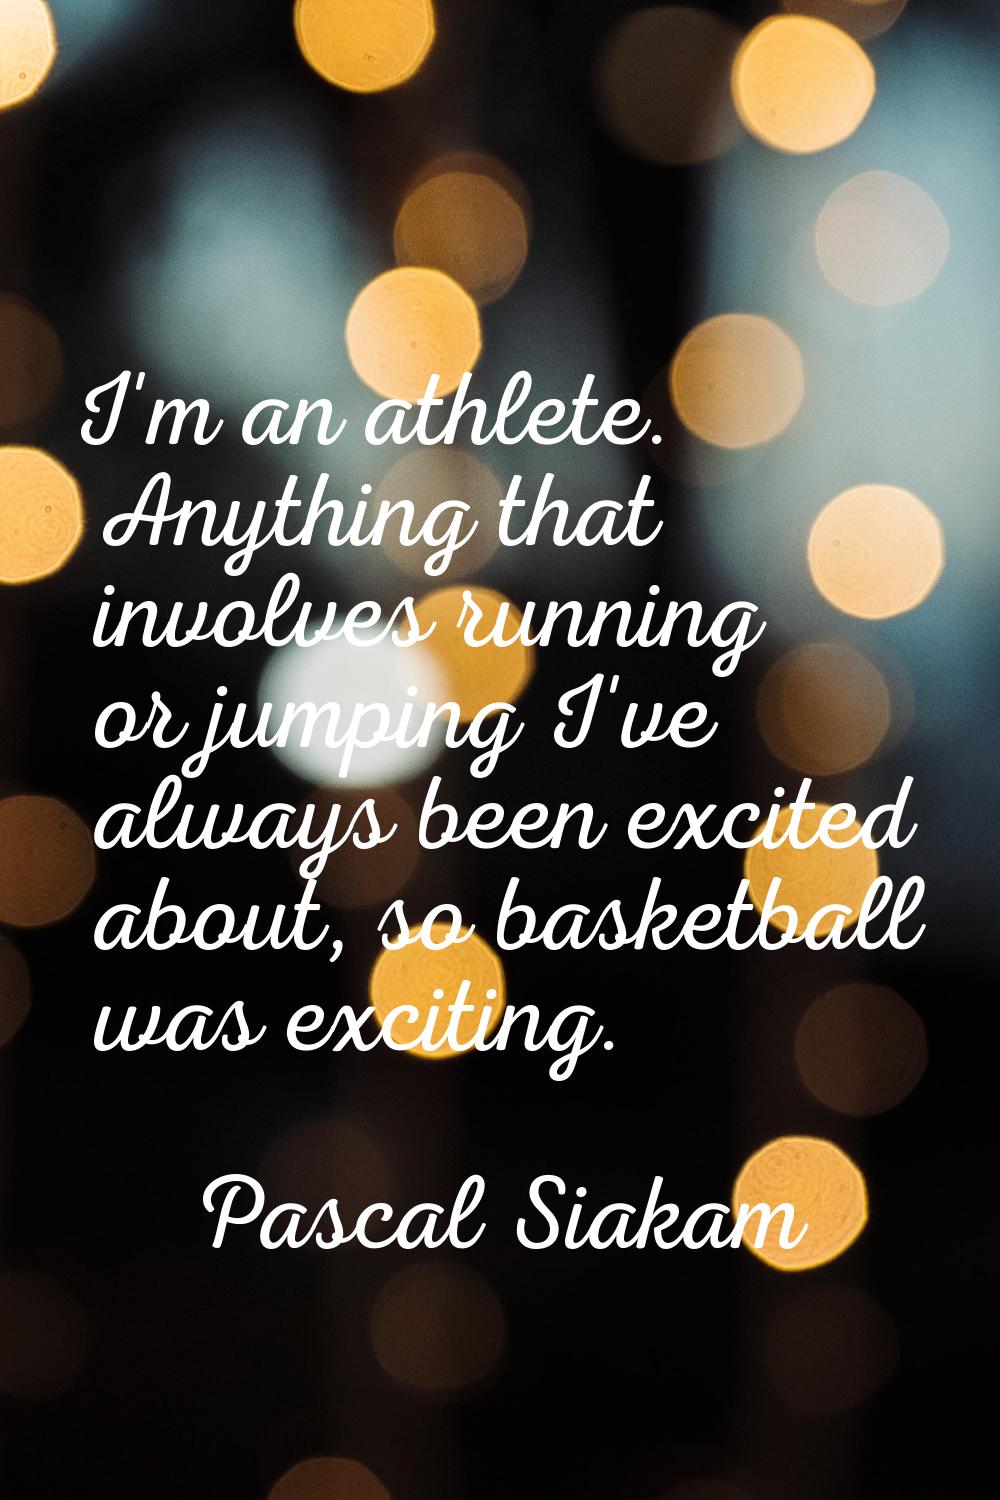 I'm an athlete. Anything that involves running or jumping I've always been excited about, so basket